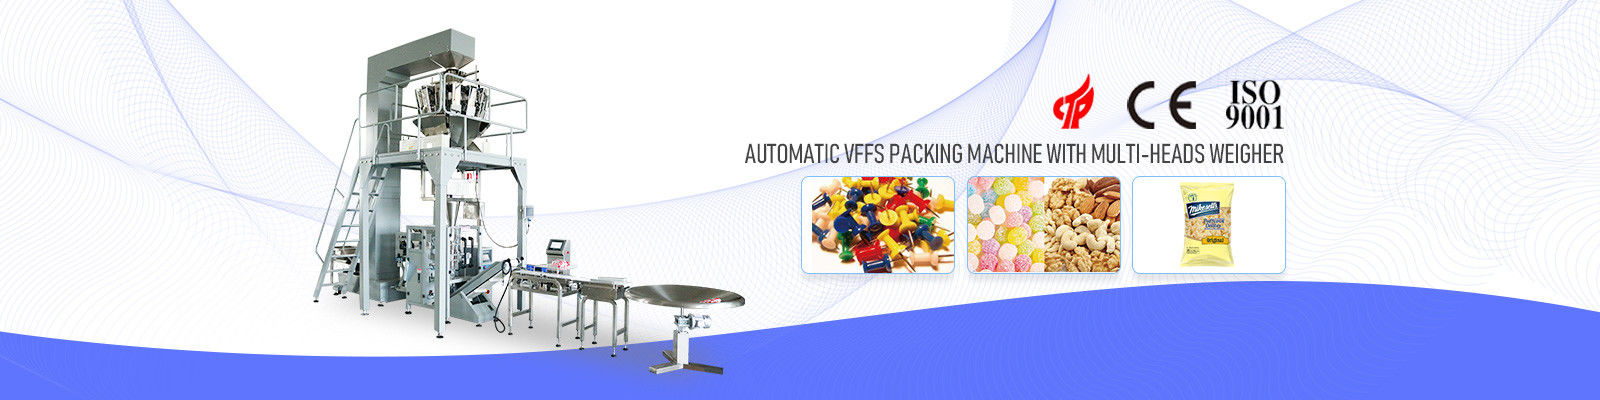 China best Food Packing Machine on sales